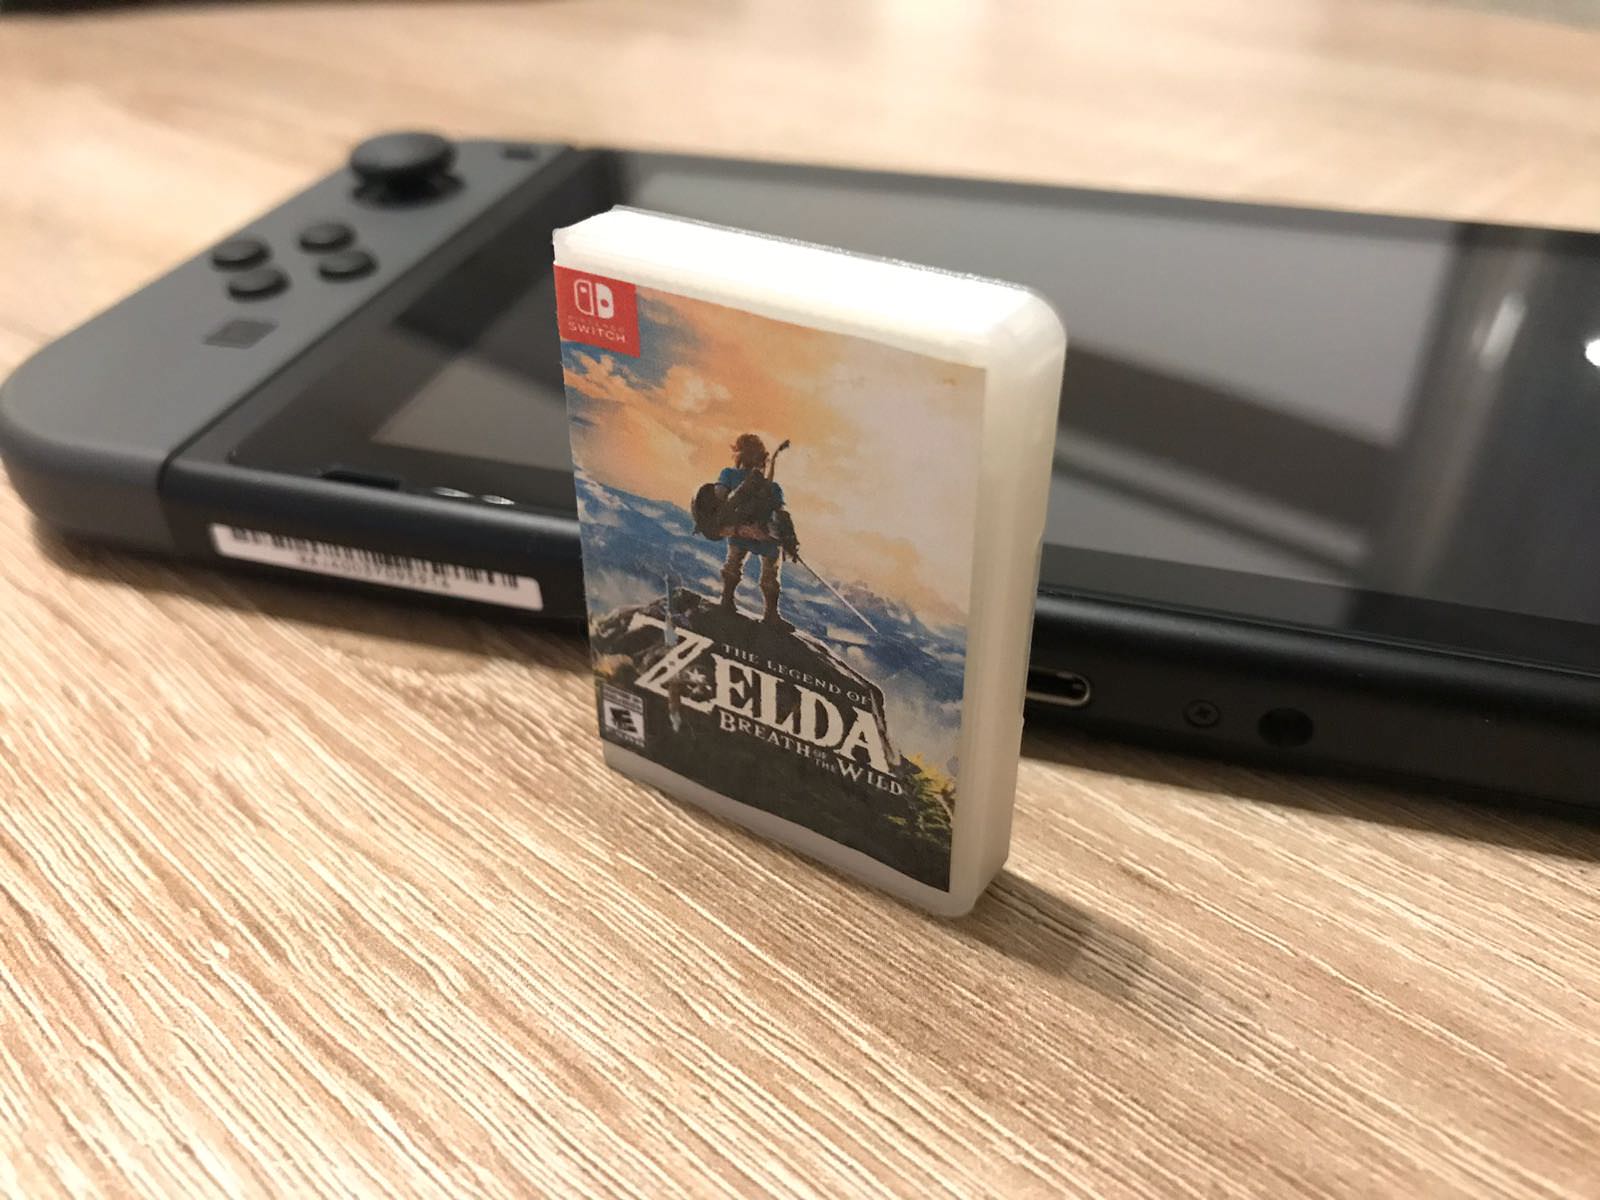 3D This Mini Nintendo Switch Game Card Case At Home – NintendoSoup